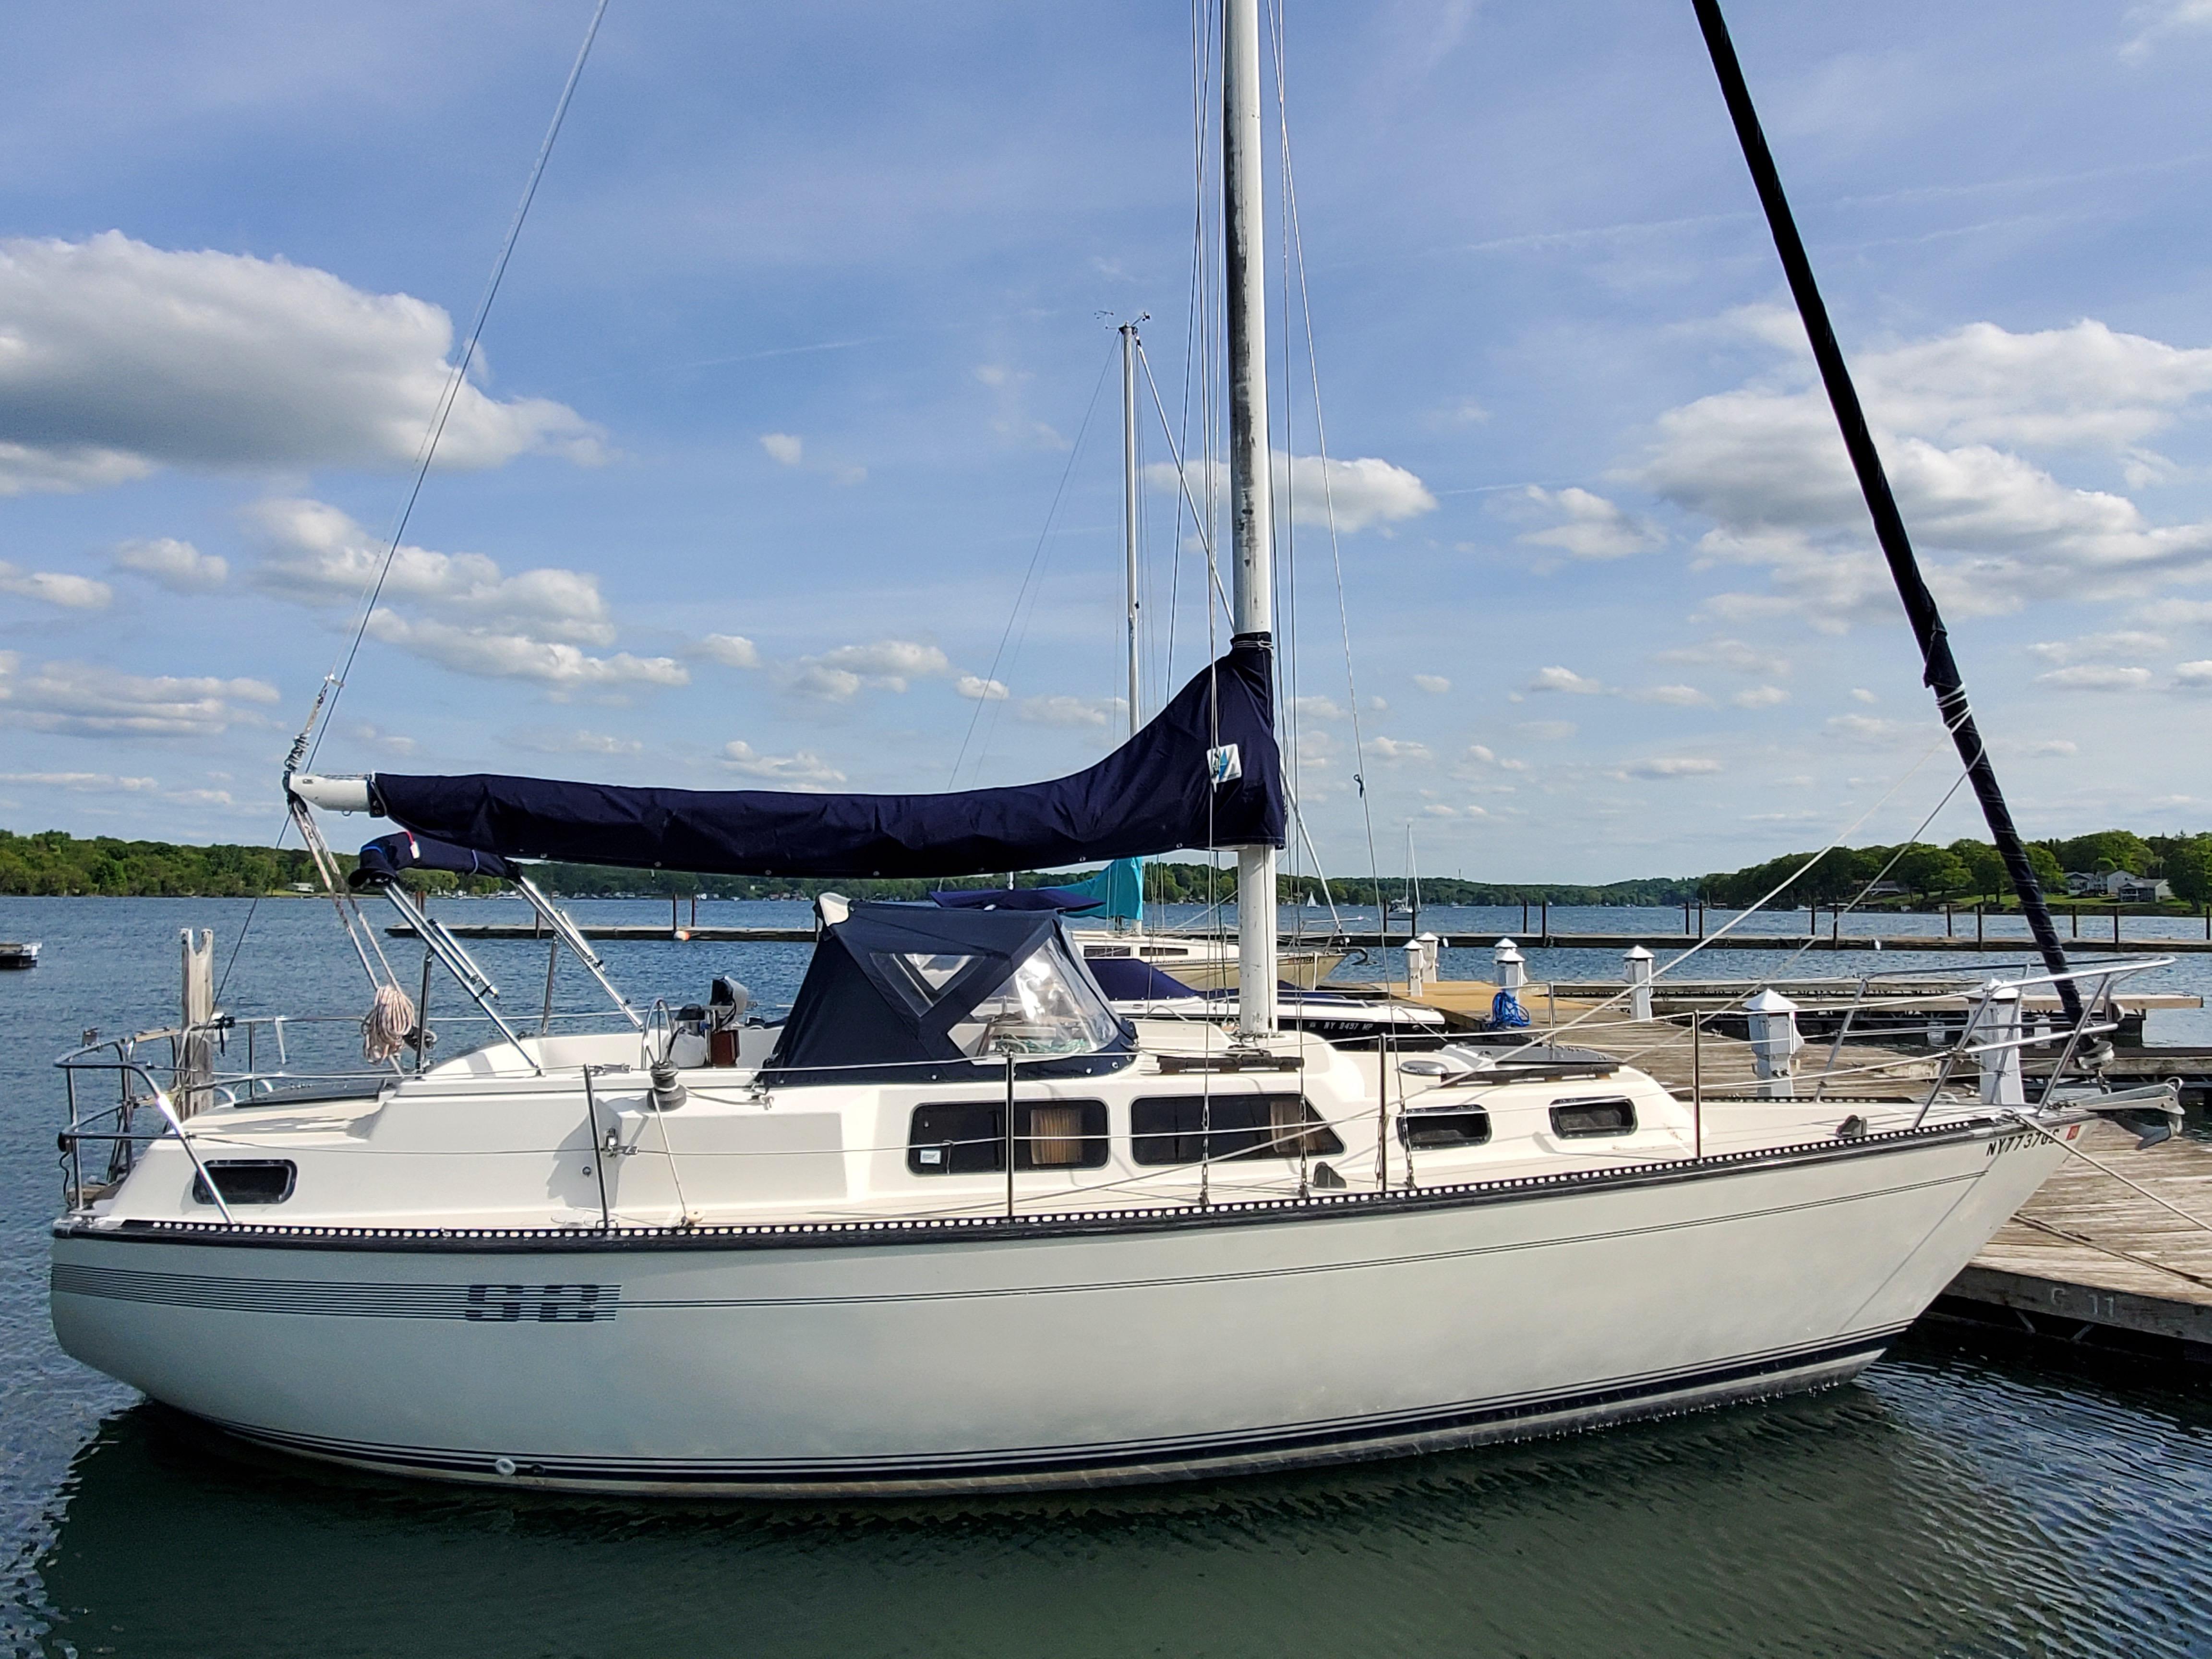 s2 9.2c sailboat for sale